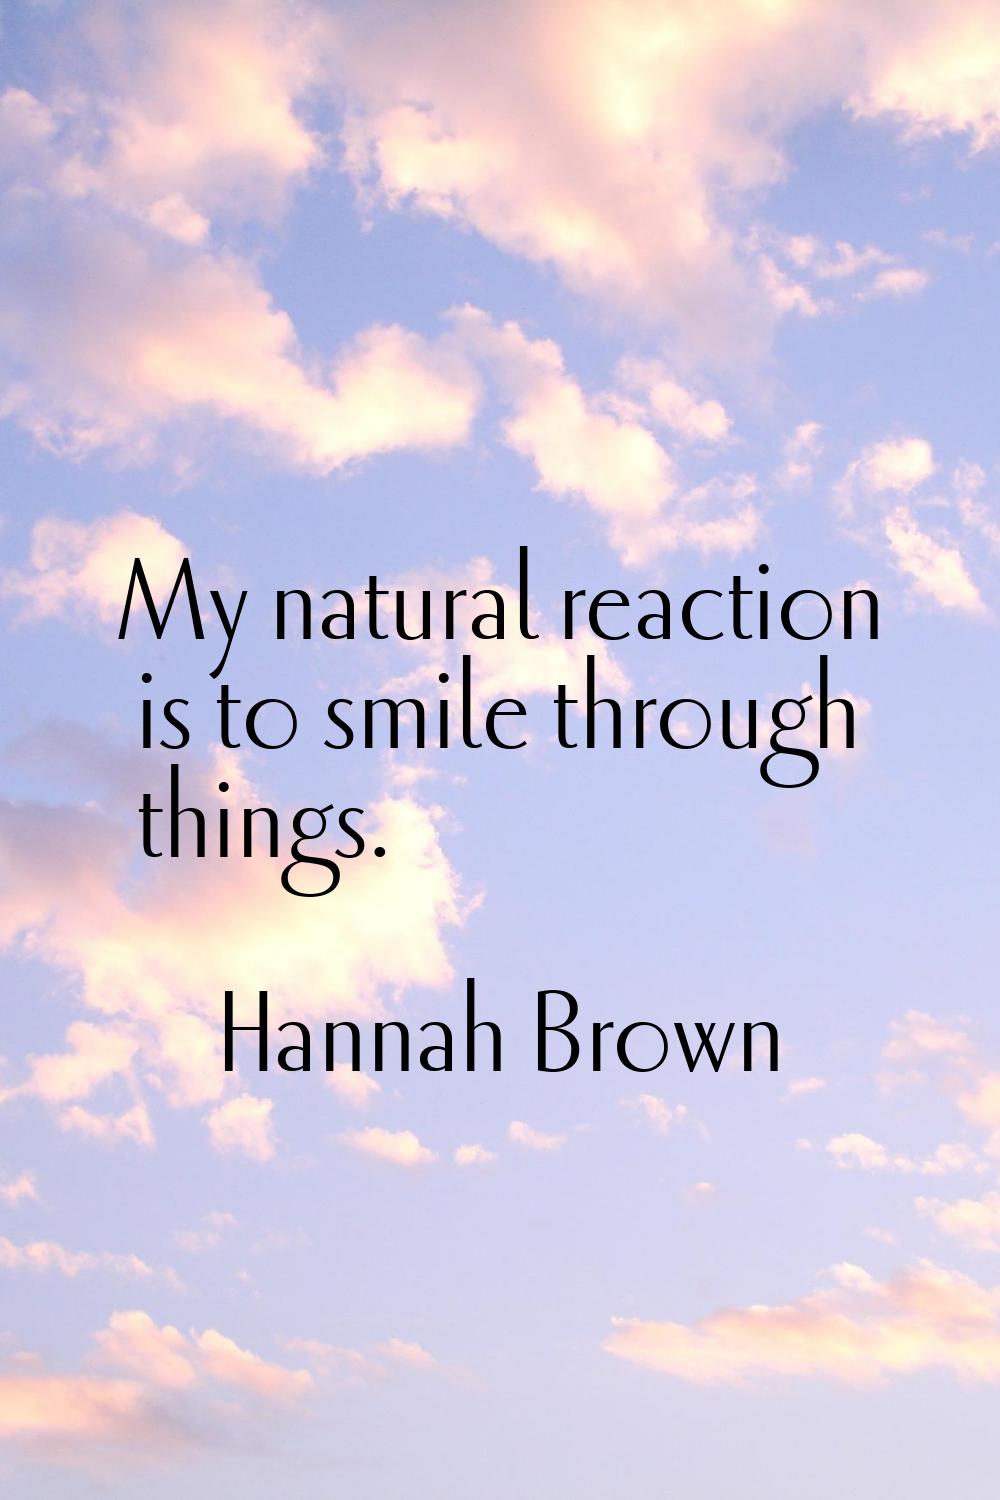 My natural reaction is to smile through things.